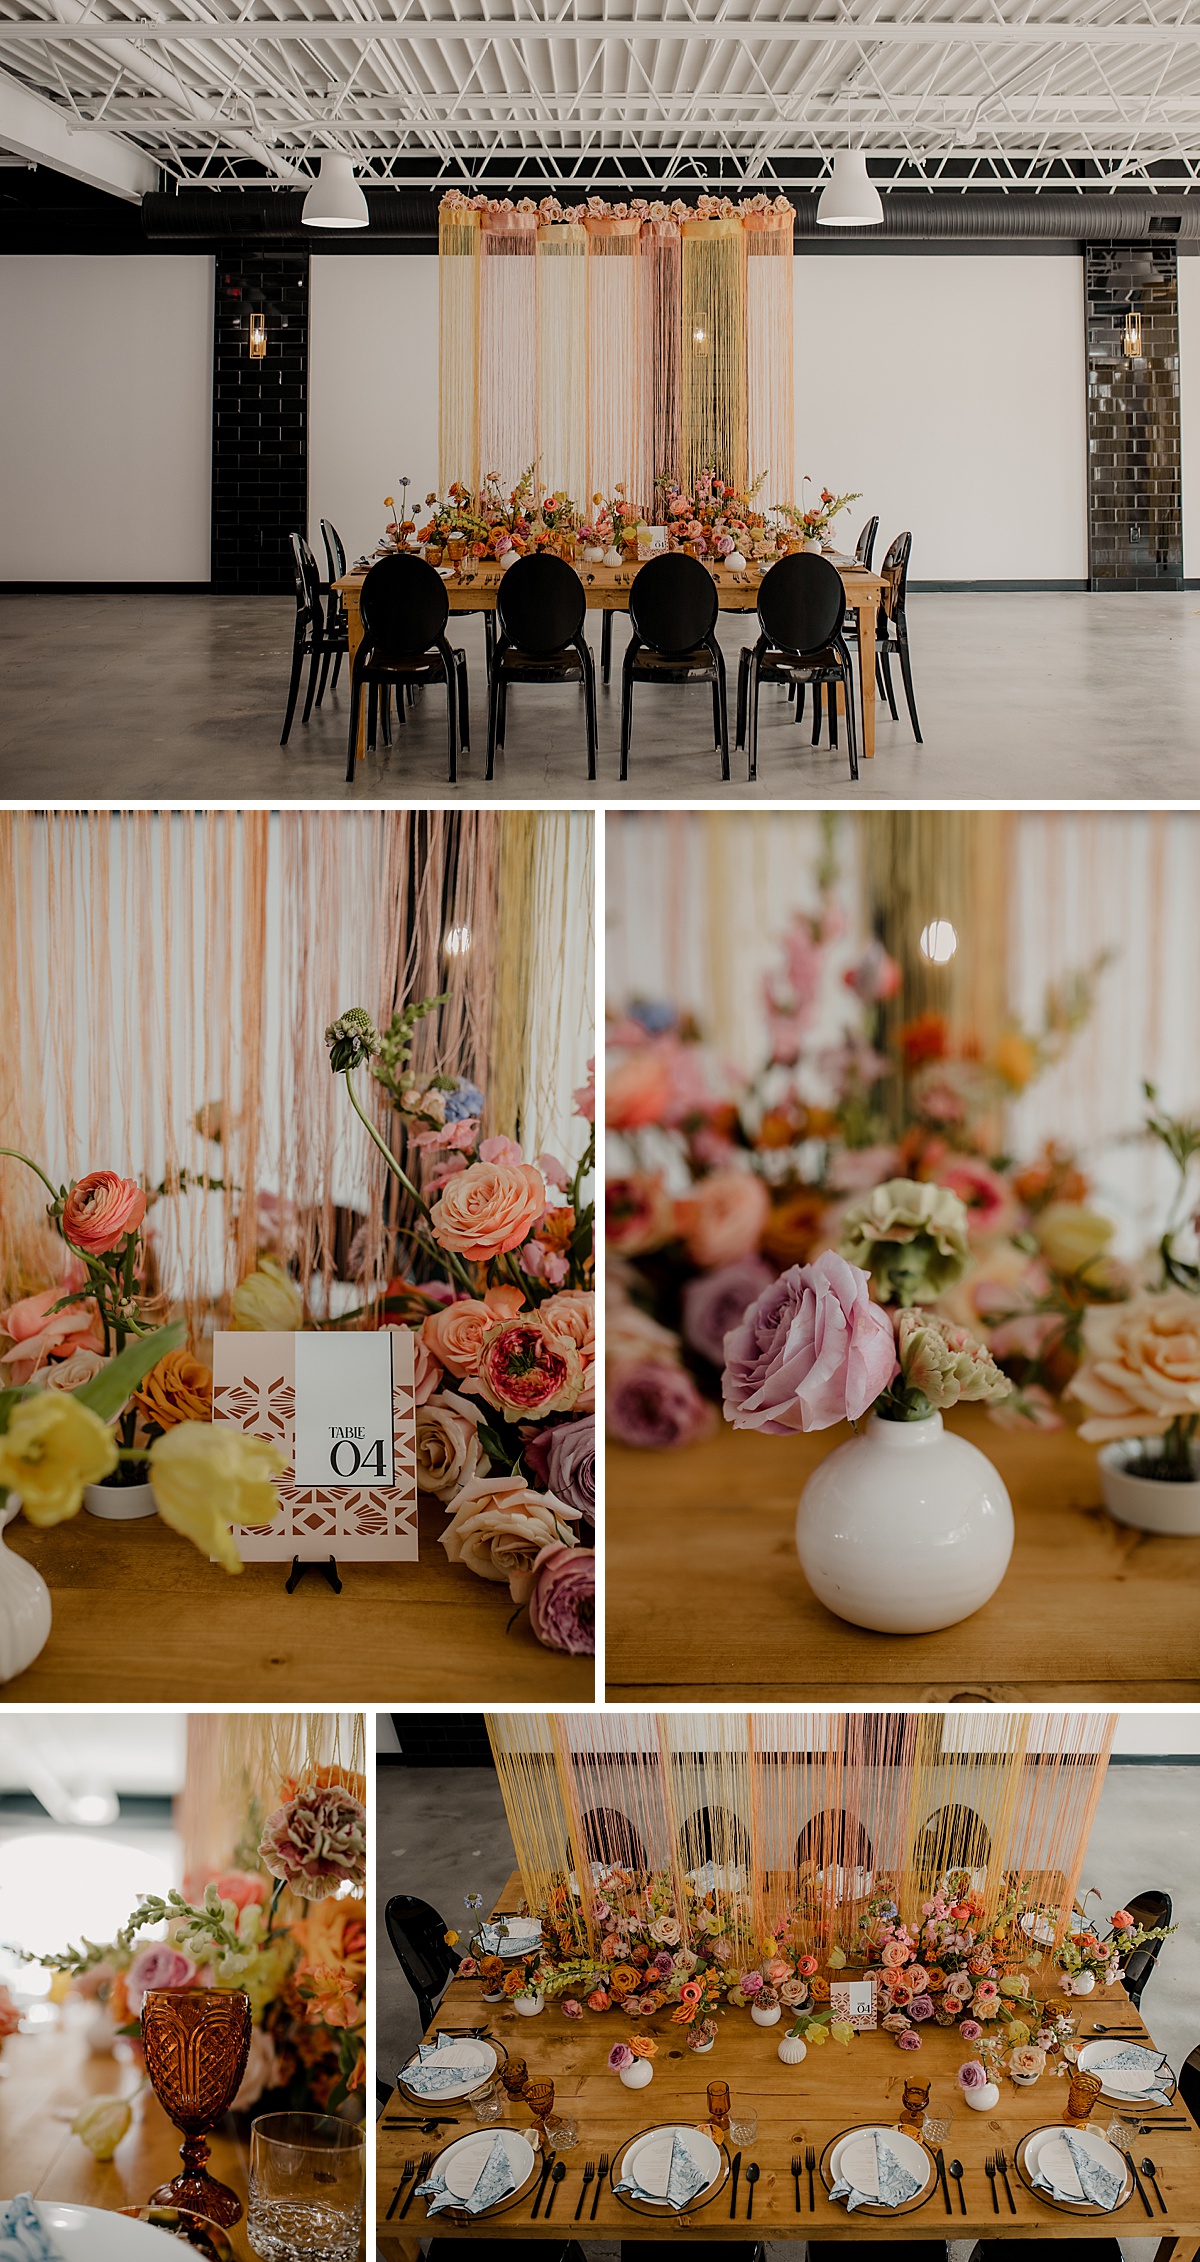 Modern, bold wedding tablescape design with flowers, black cutlery and hanging fringe installation.